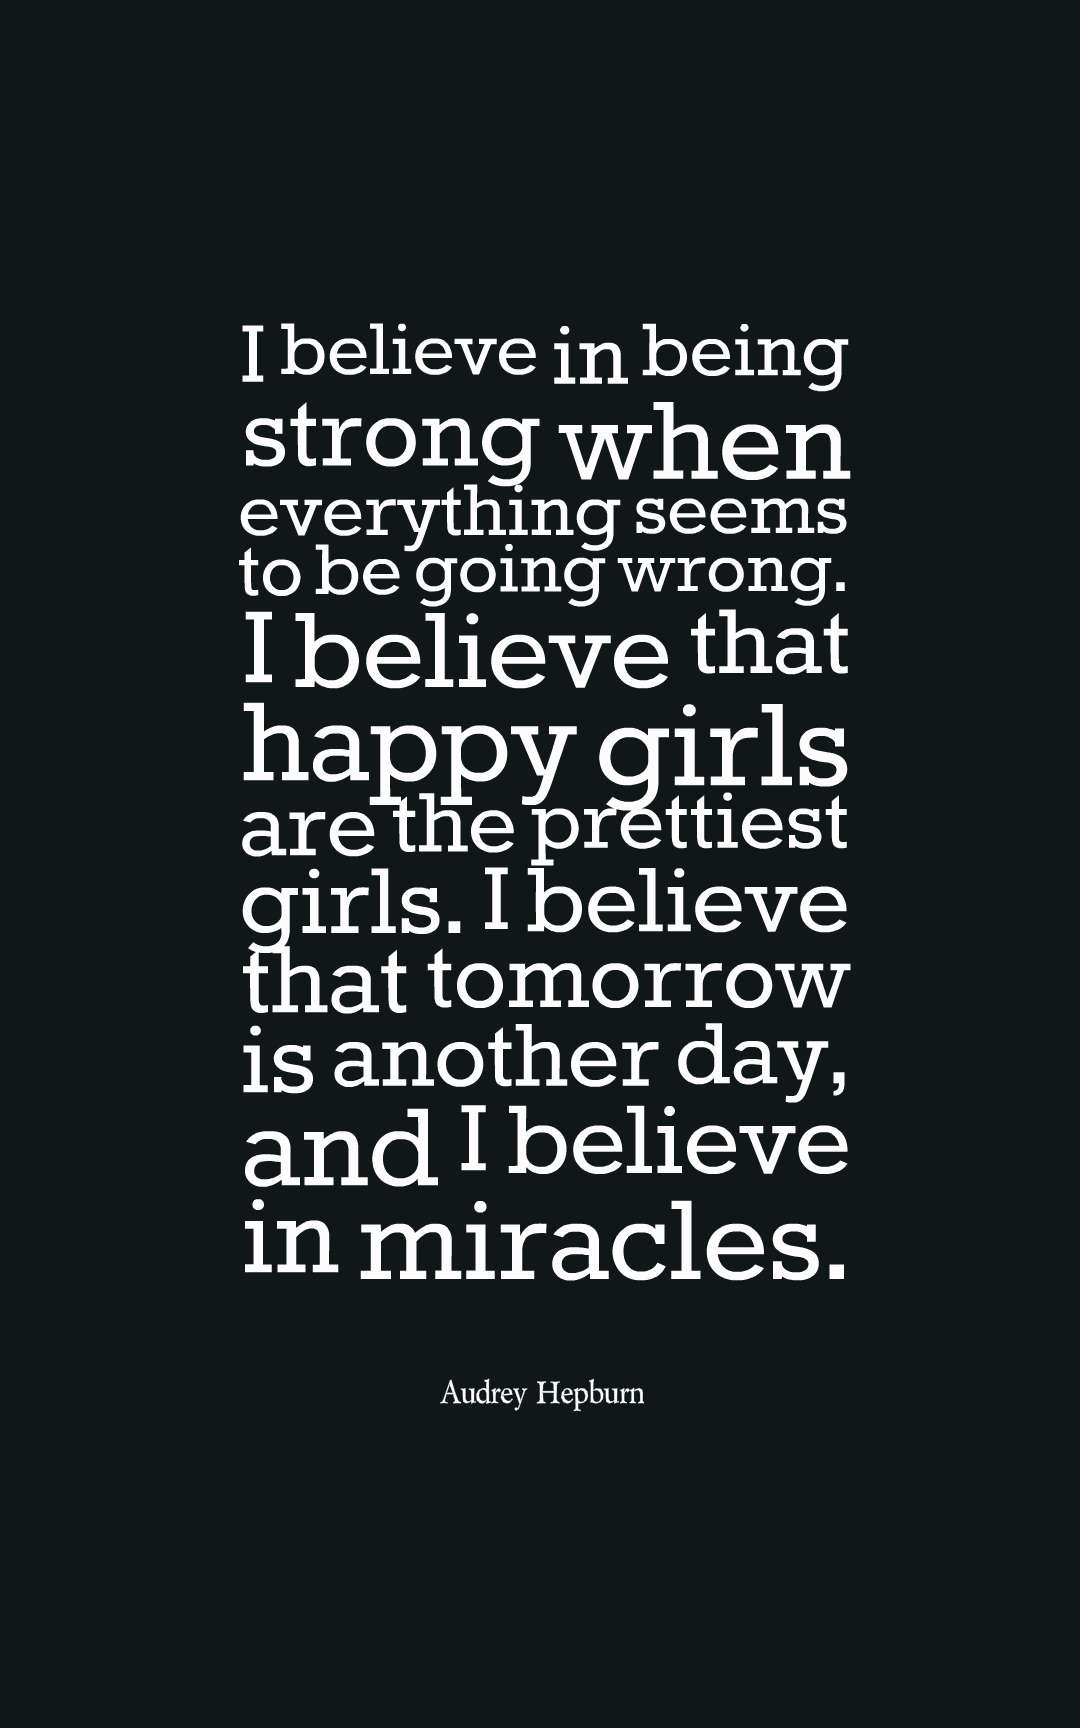 I believe in being strong when everything seems to be going wrong. I believe that happy girls are the prettiest girls. I believe that tomorrow is another day, and I believe in miracles.